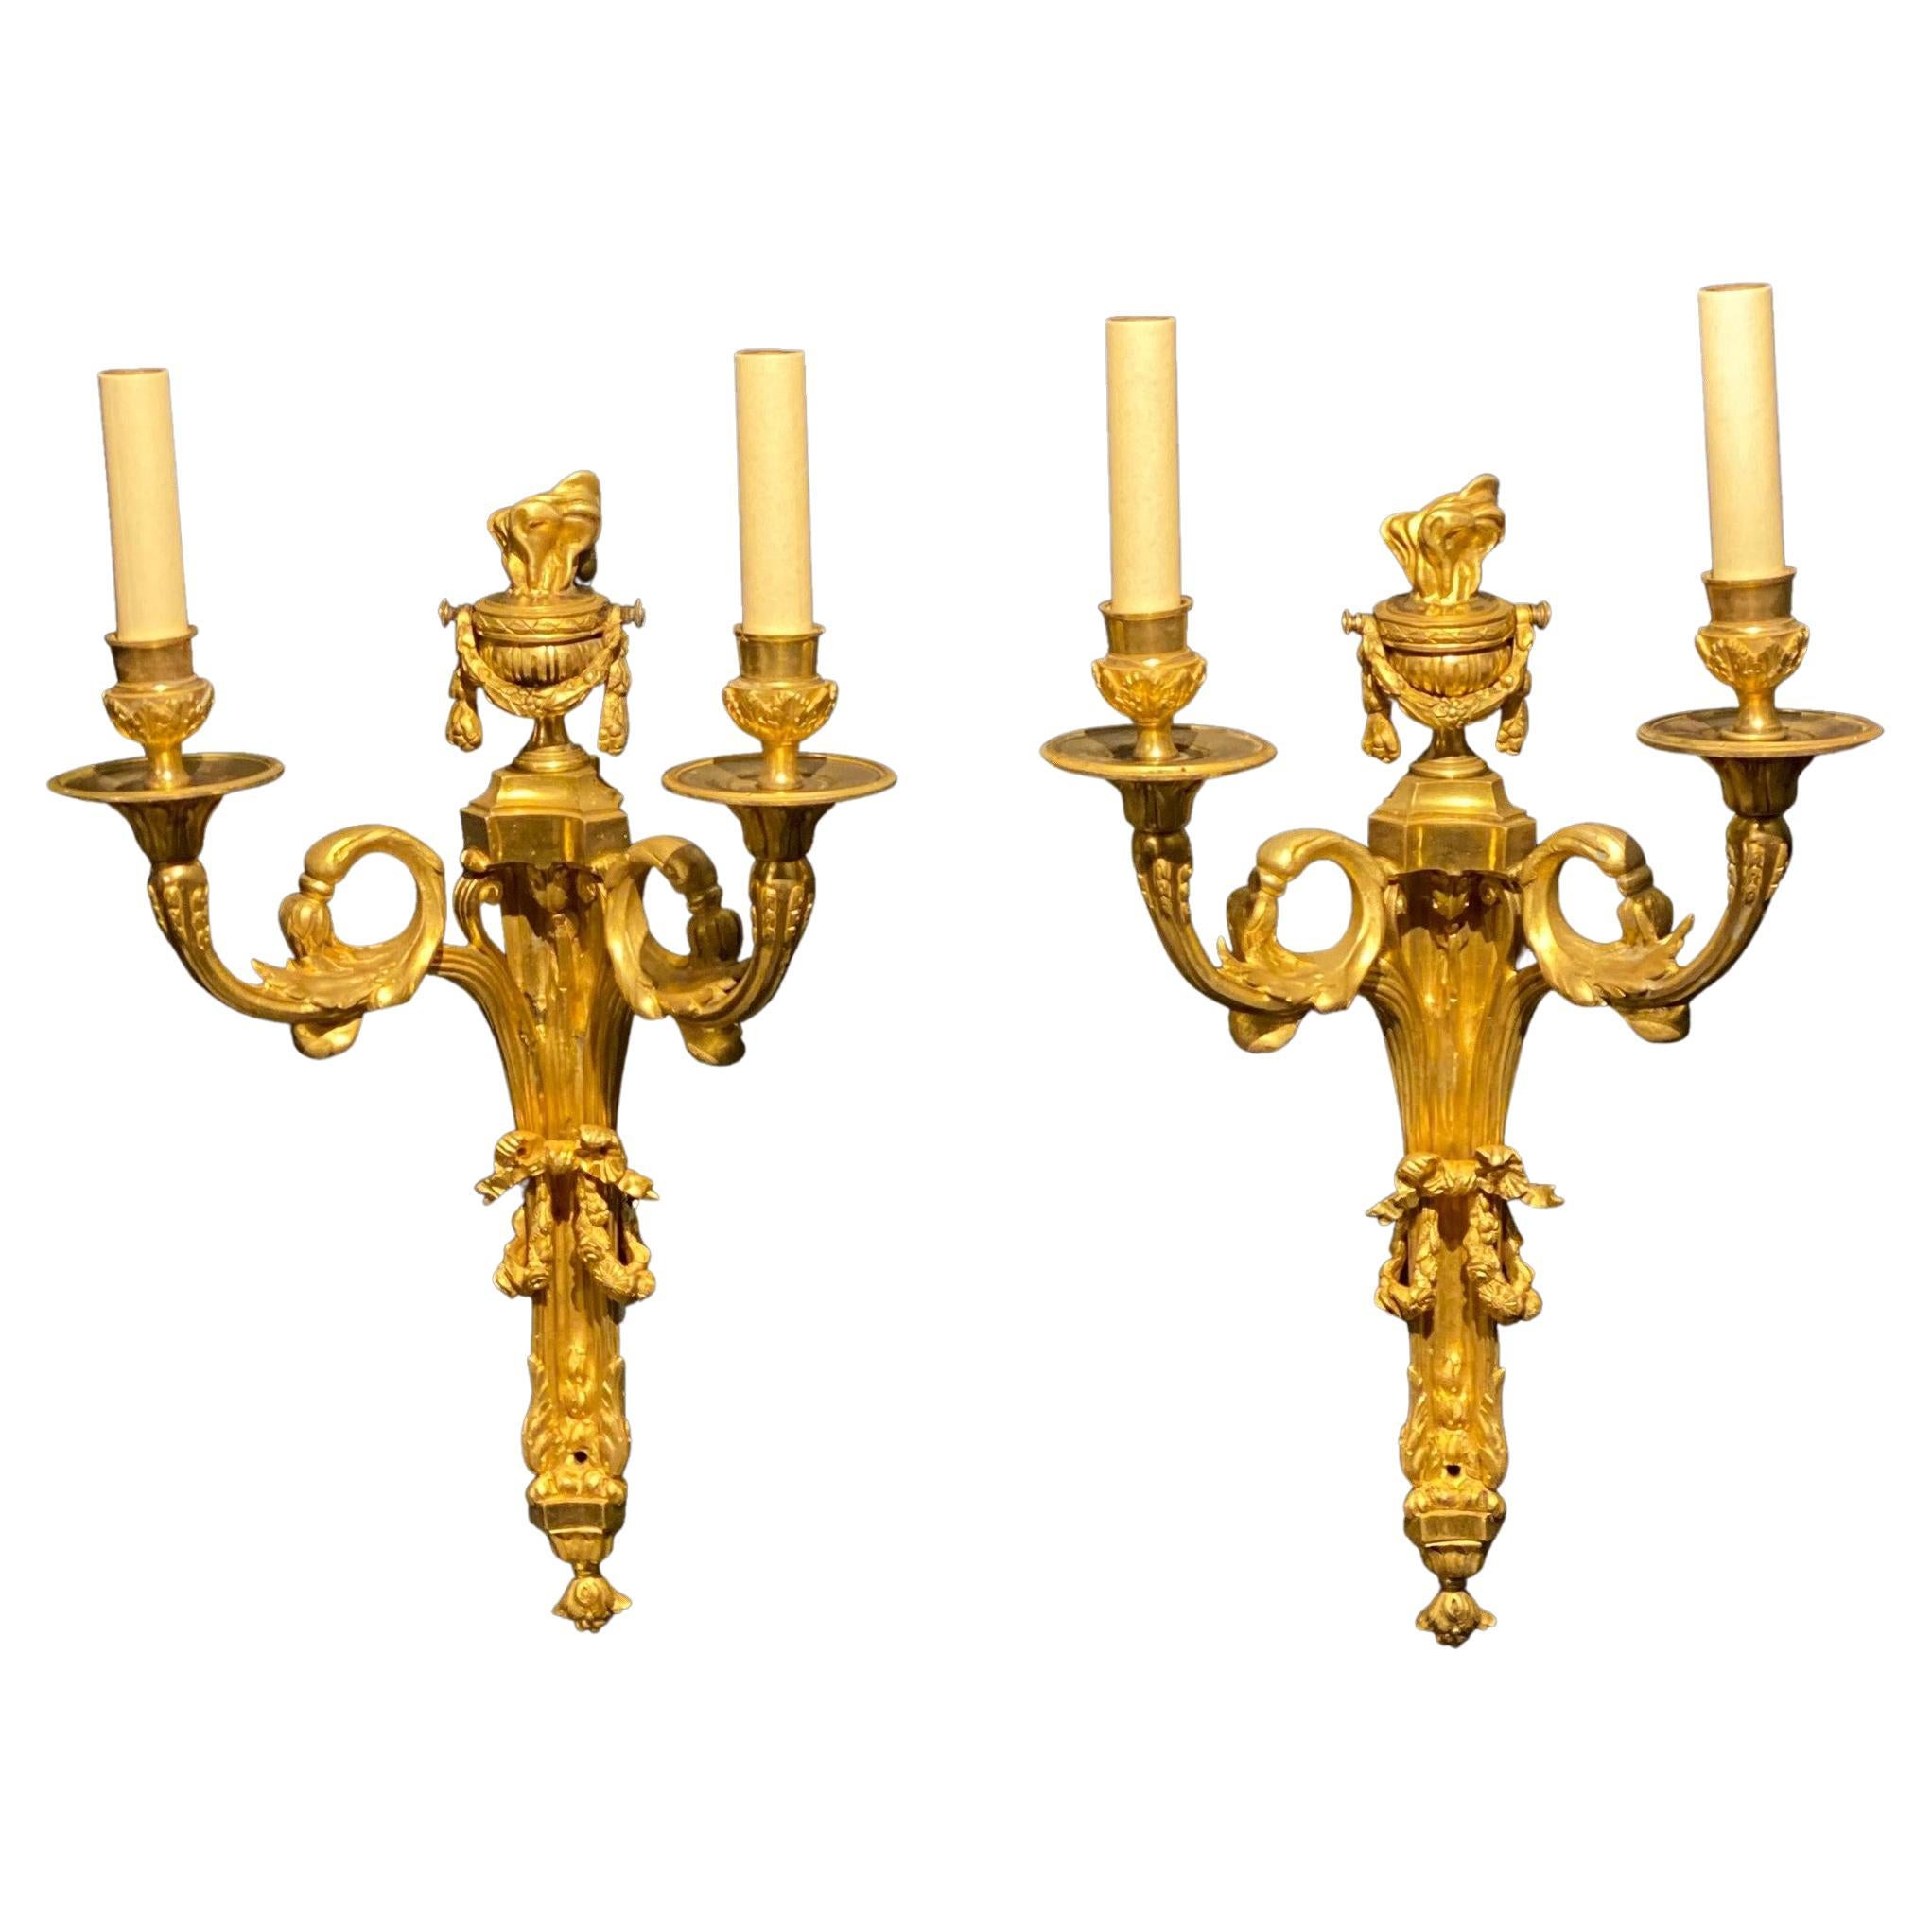 1900s French Gilt Bronze Sconces with Twisted Arms For Sale